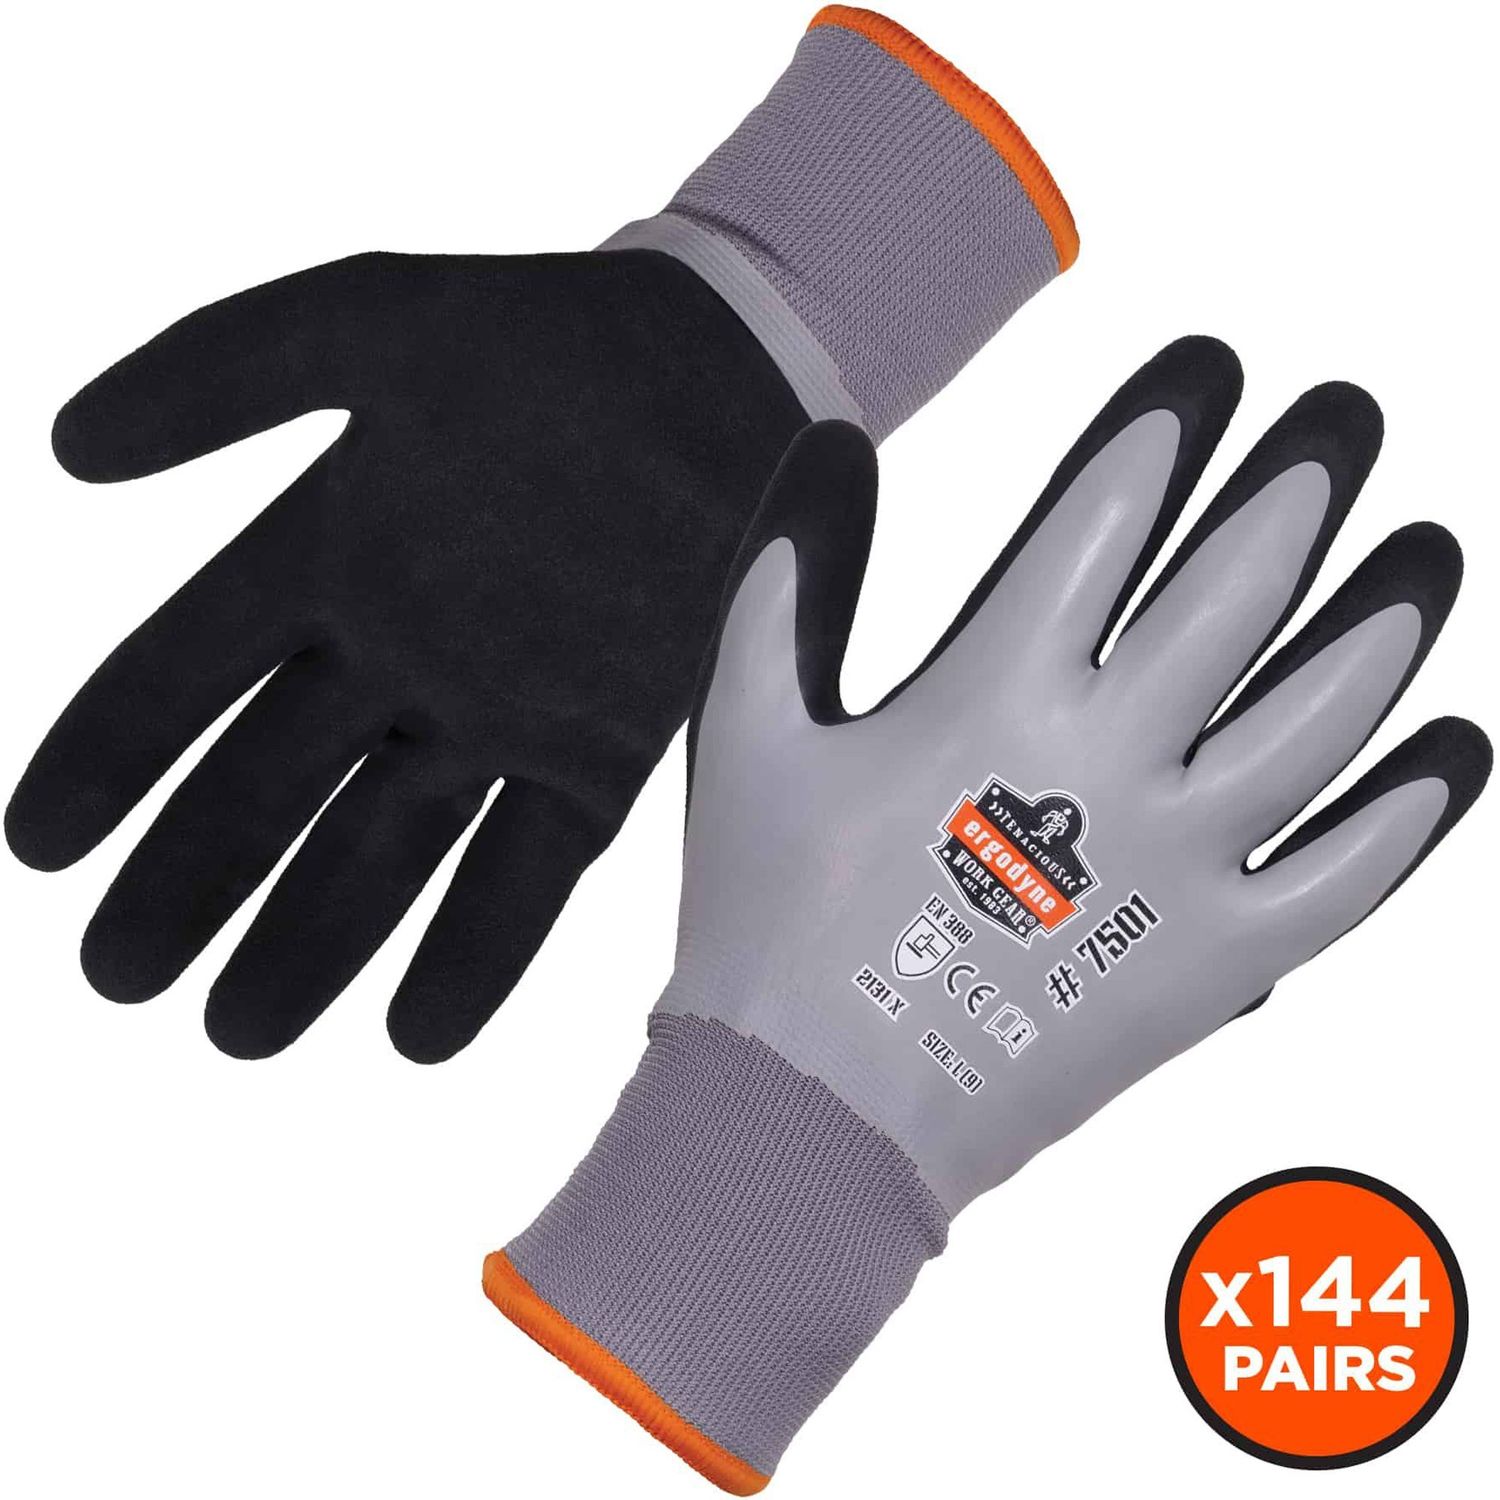 7501-CASE Coated Waterproof Winter Work Gloves Thermal Protection, Nitrile, Latex Coating, Large Size, Polyester Liner, Acrylic Fleece Liner, Gray